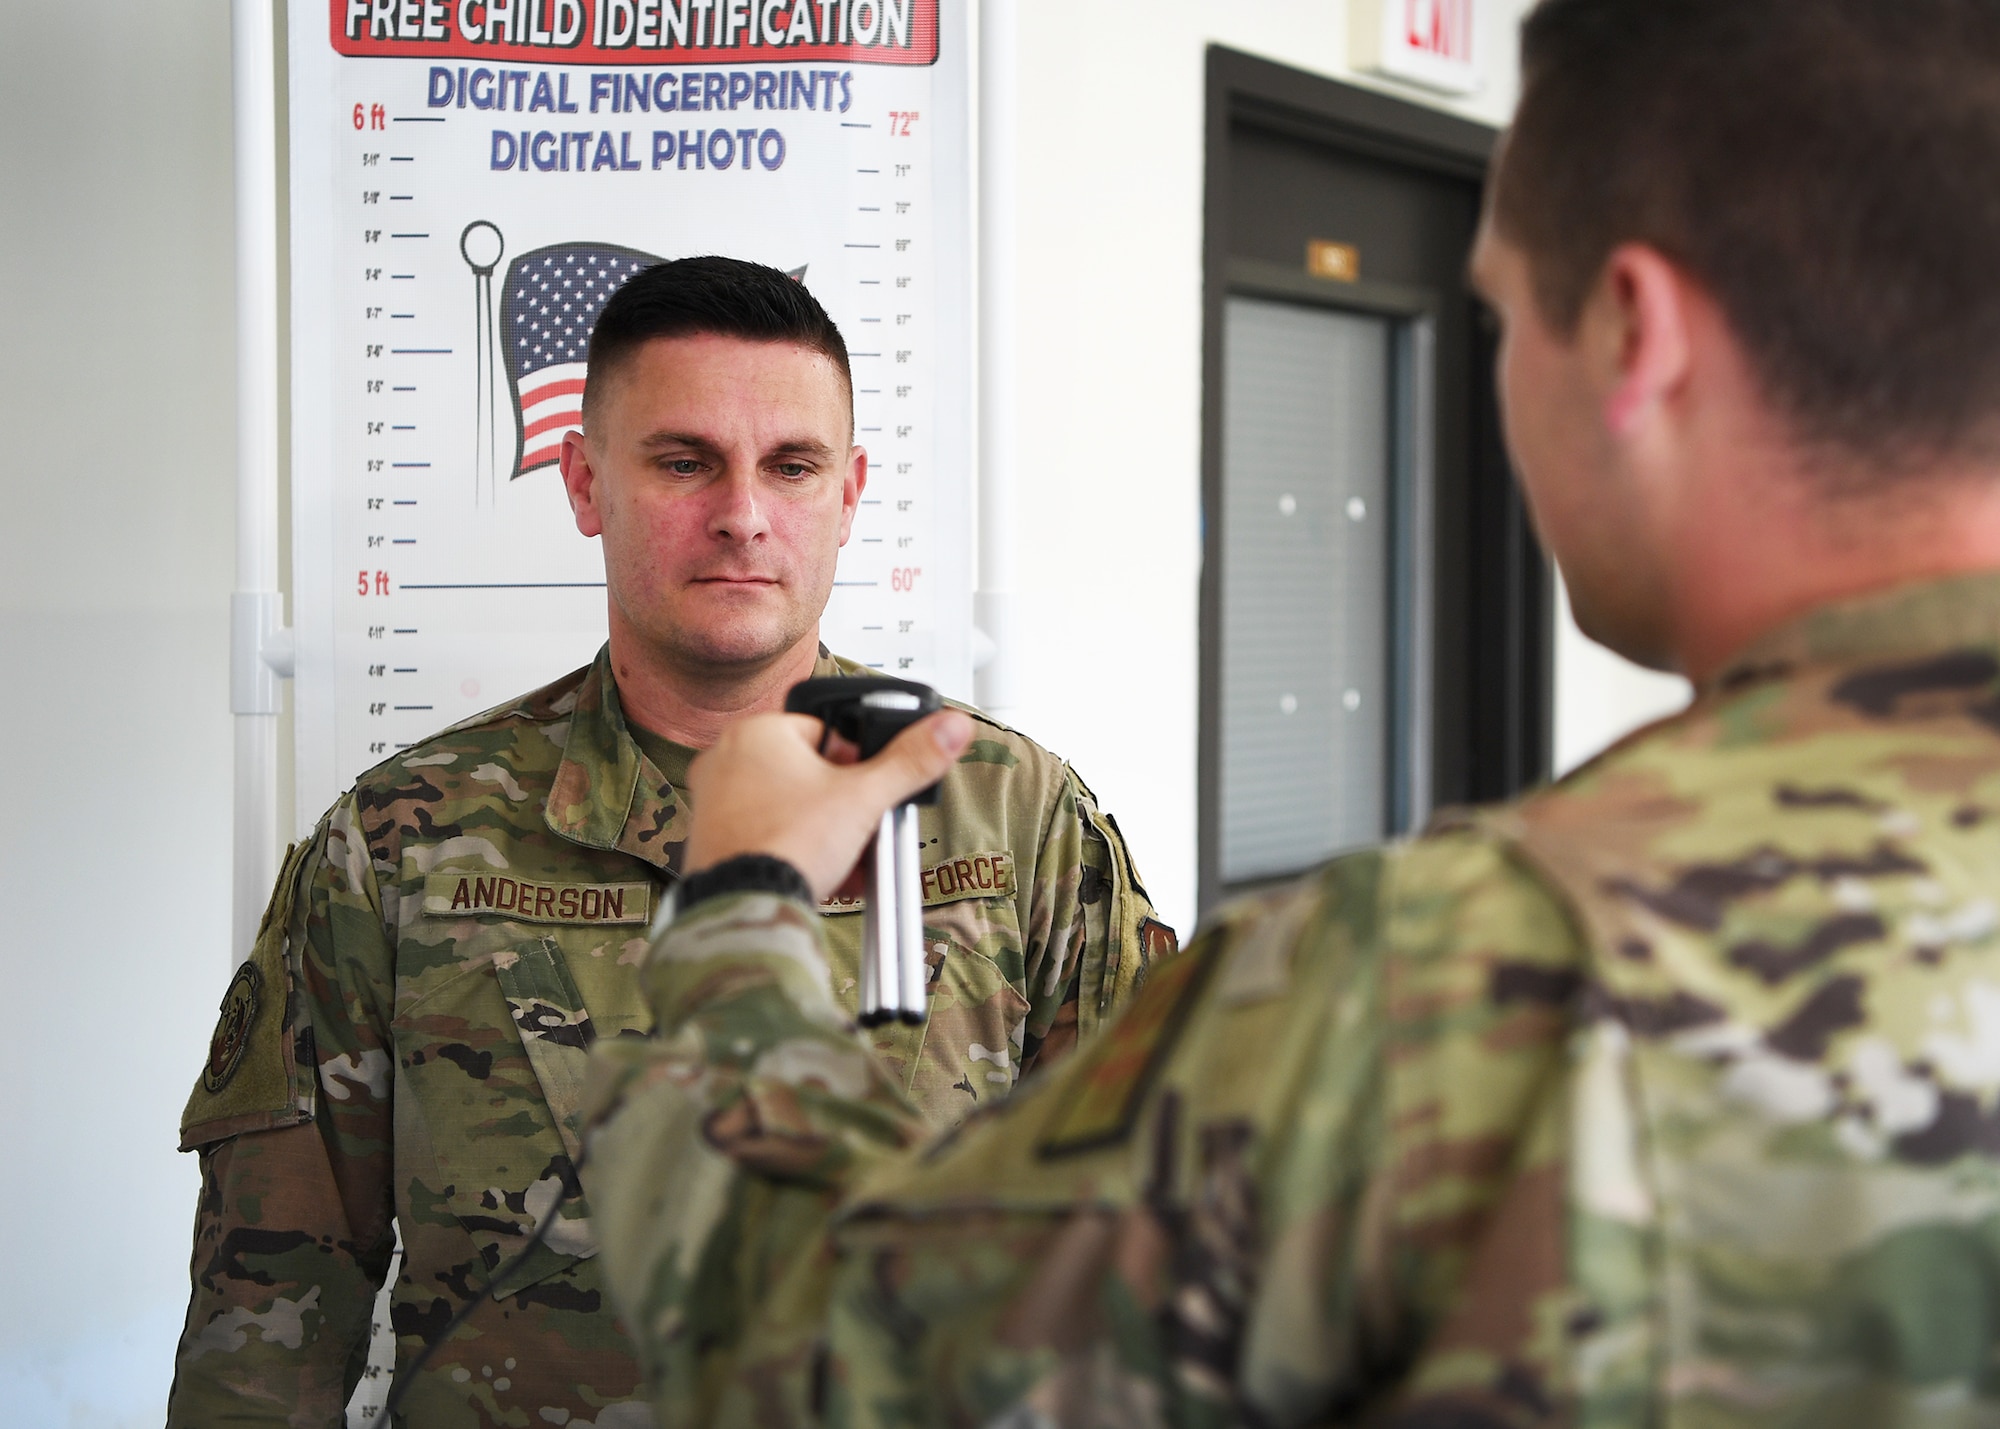 Two Airmen using identification device